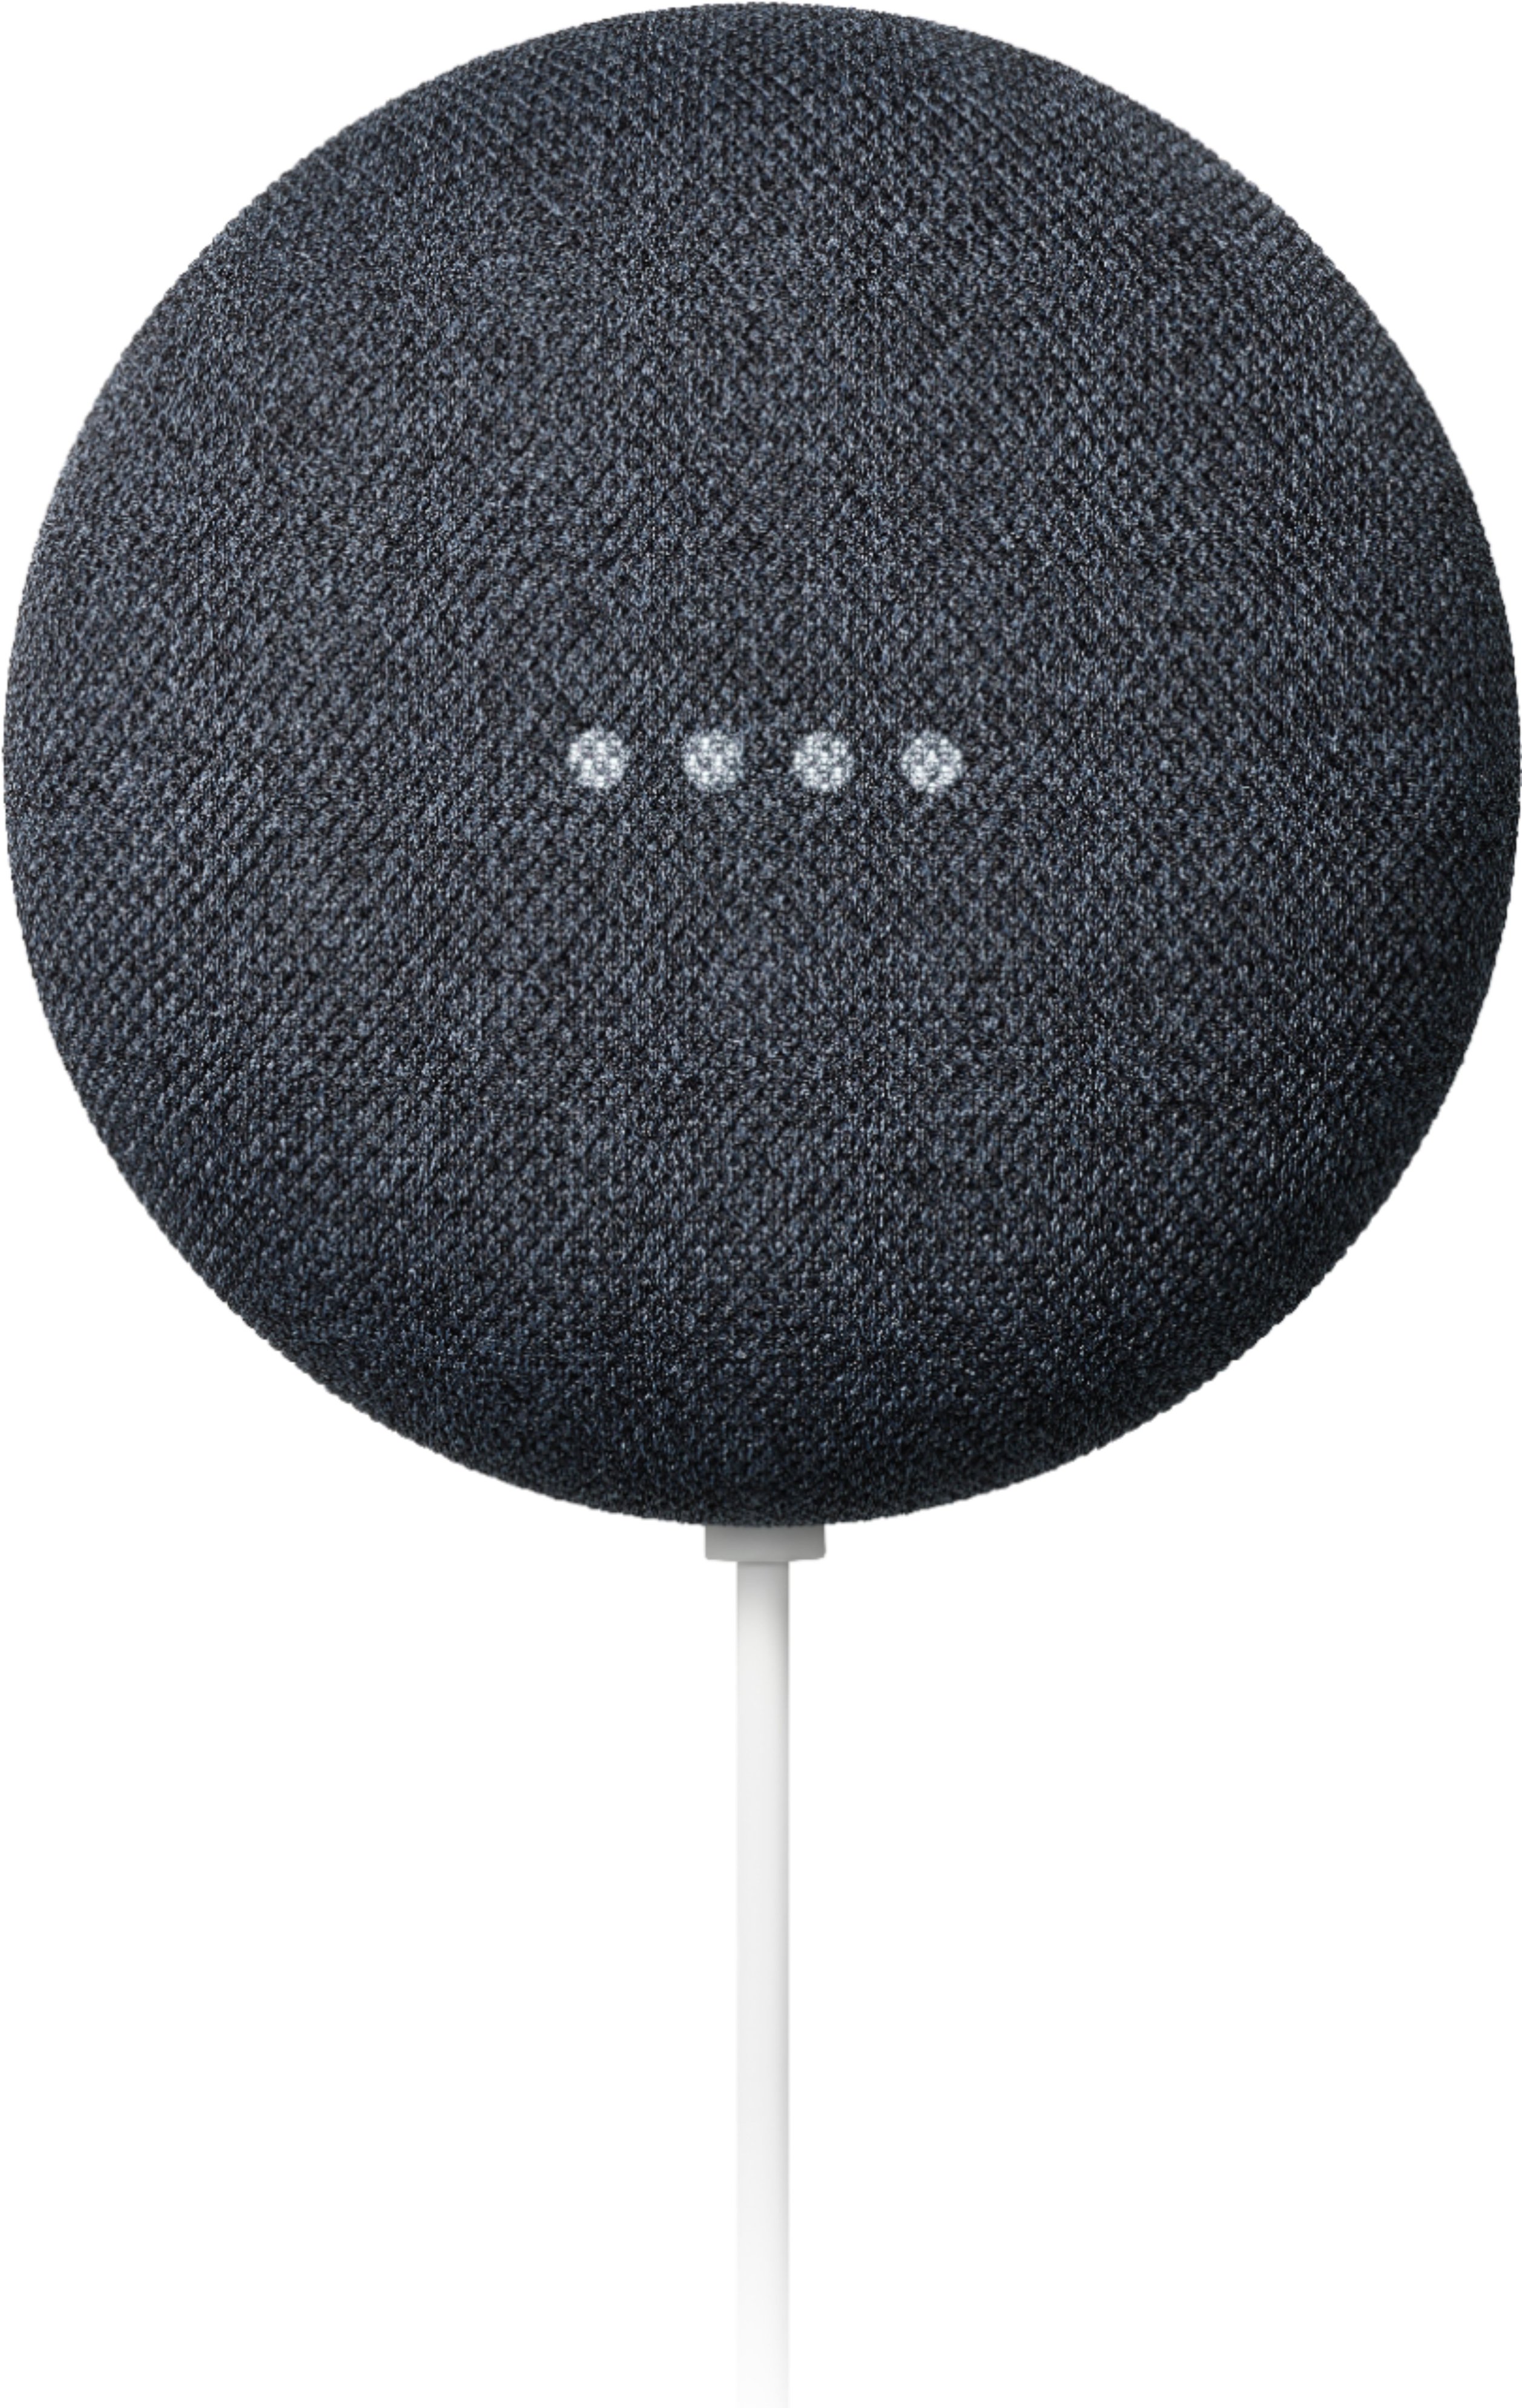 Zoom in on Front Zoom. Nest Mini (2nd Generation) with Google Assistant - Charcoal.